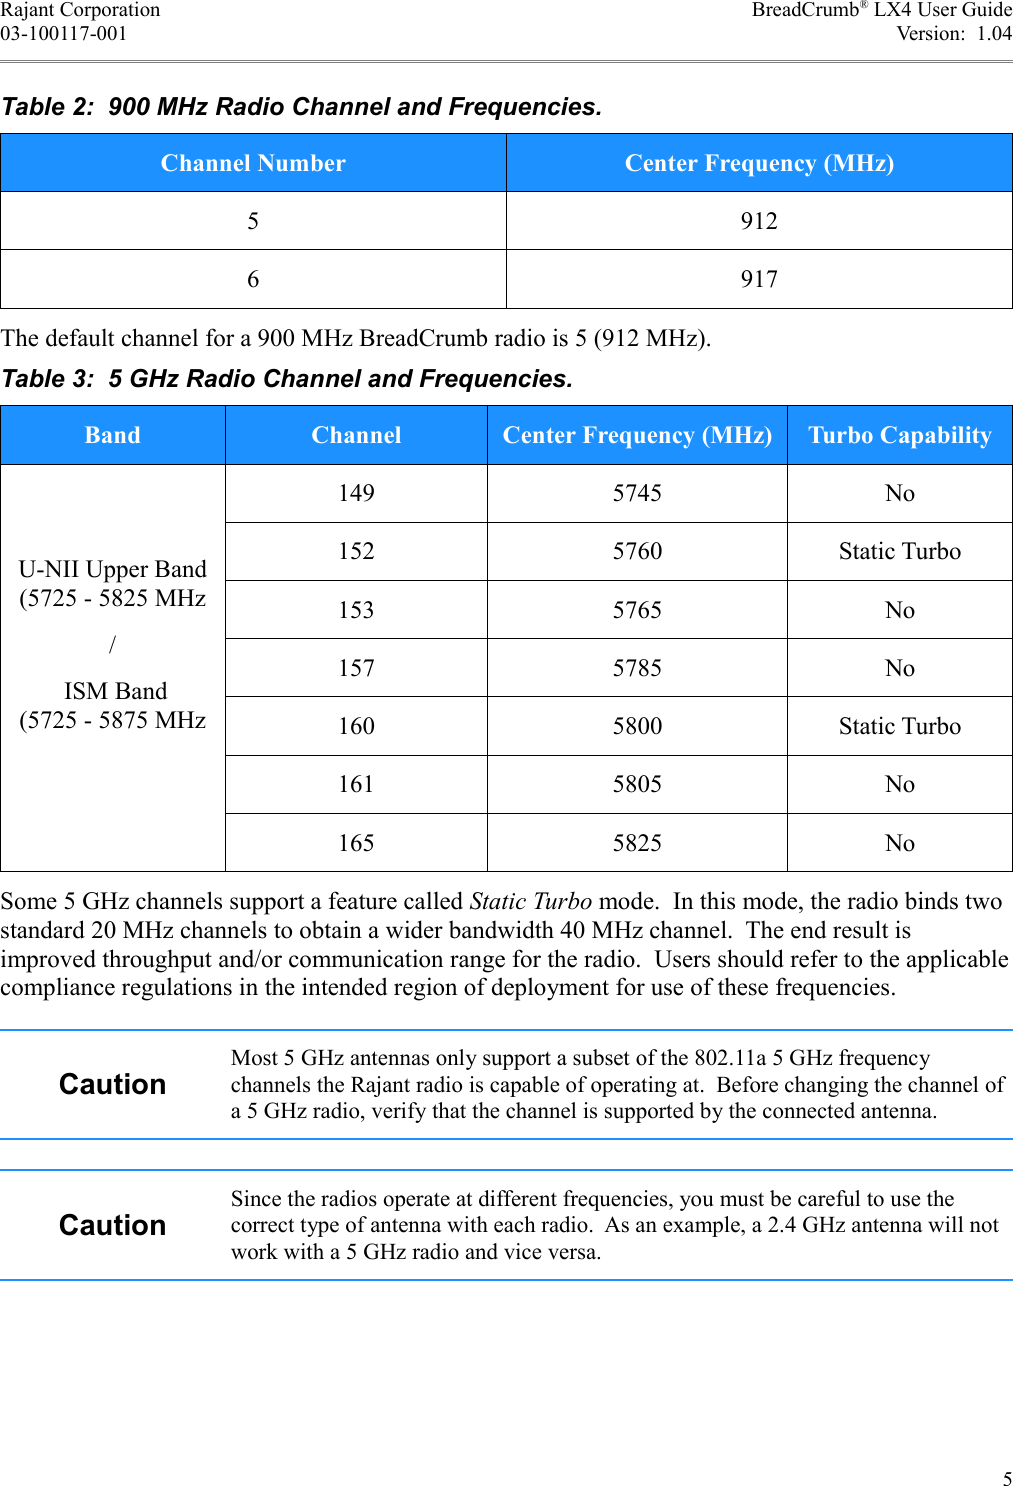 Rajant Corporation BreadCrumb® LX4 User Guide03-100117-001 Version:  1.04Table 2:  900 MHz Radio Channel and Frequencies.Channel Number Center Frequency (MHz)5 9126 917The default channel for a 900 MHz BreadCrumb radio is 5 (912 MHz).Table 3:  5 GHz Radio Channel and Frequencies.Band Channel Center Frequency (MHz) Turbo CapabilityU-NII Upper Band (5725 - 5825 MHz/ ISM Band (5725 - 5875 MHz149 5745 No152 5760 Static Turbo153 5765 No157 5785 No160 5800 Static Turbo161 5805 No165 5825 NoSome 5 GHz channels support a feature called Static Turbo mode.  In this mode, the radio binds two standard 20 MHz channels to obtain a wider bandwidth 40 MHz channel.  The end result is improved throughput and/or communication range for the radio.  Users should refer to the applicable compliance regulations in the intended region of deployment for use of these frequencies.CautionMost 5 GHz antennas only support a subset of the 802.11a 5 GHz frequency channels the Rajant radio is capable of operating at.  Before changing the channel of a 5 GHz radio, verify that the channel is supported by the connected antenna.CautionSince the radios operate at different frequencies, you must be careful to use the correct type of antenna with each radio.  As an example, a 2.4 GHz antenna will not work with a 5 GHz radio and vice versa.5